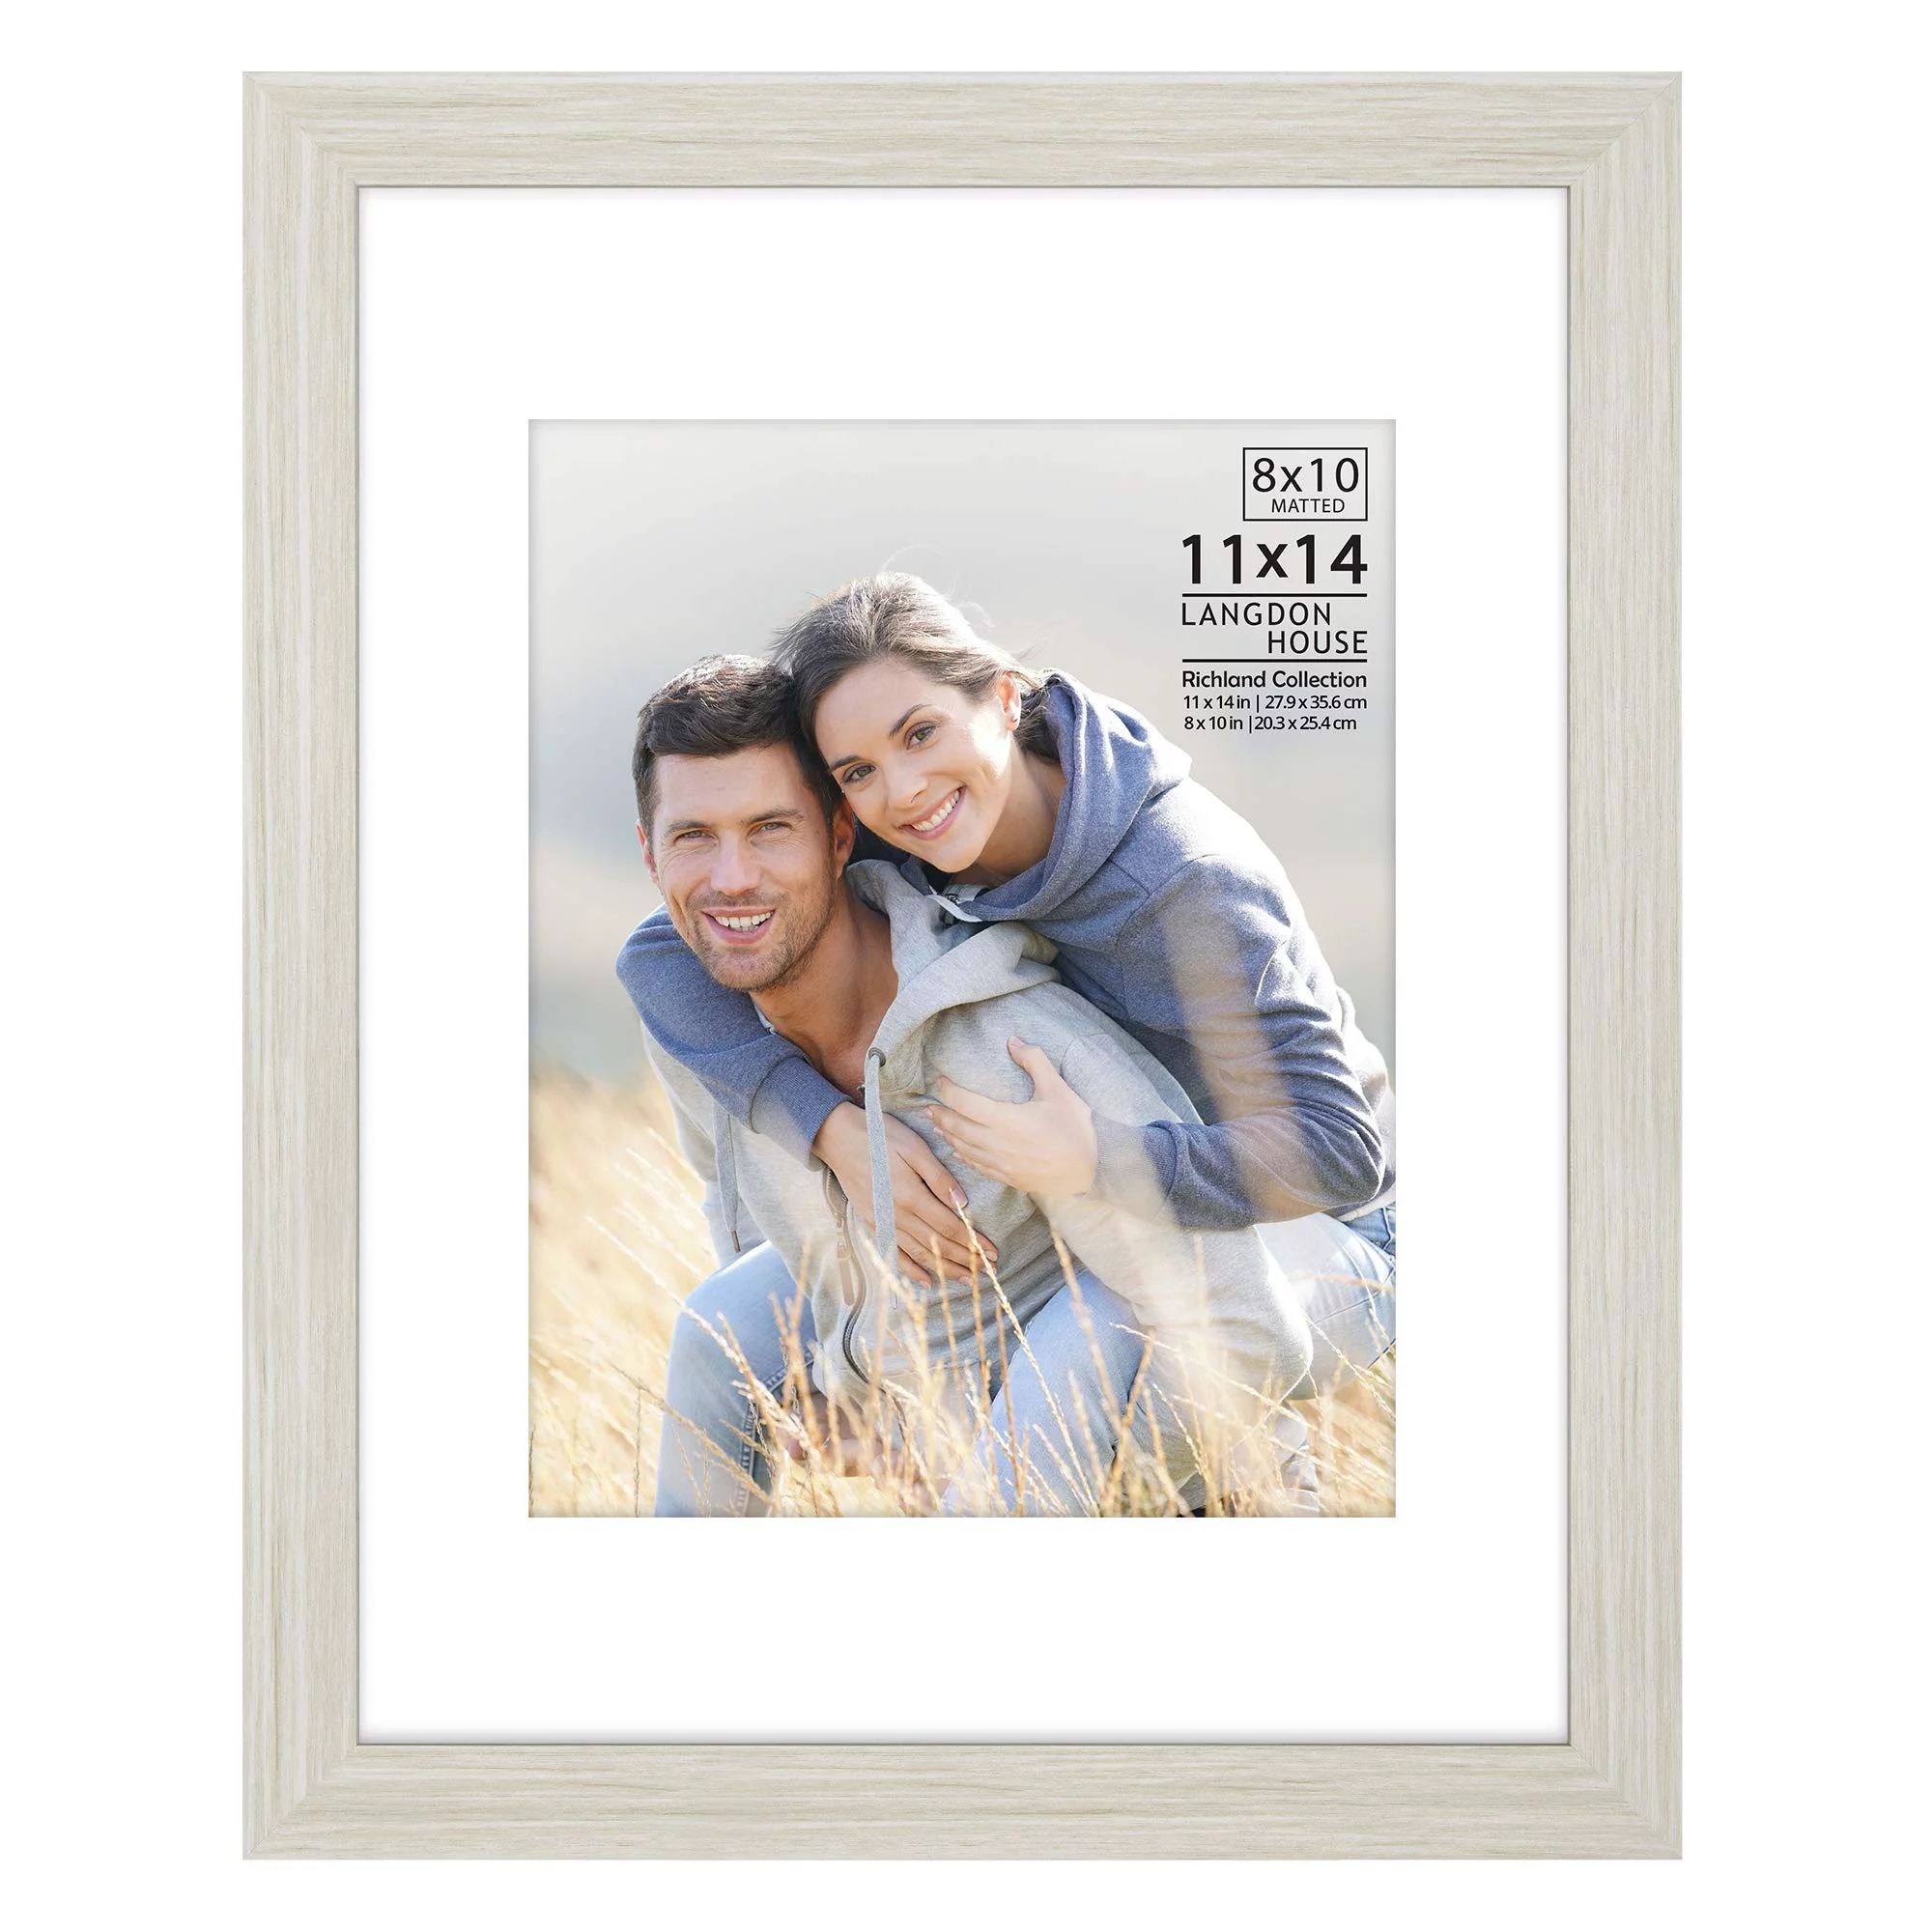 Langdon House 8x10 Wood Composite Picture Frames, Brown | Walmart (US)